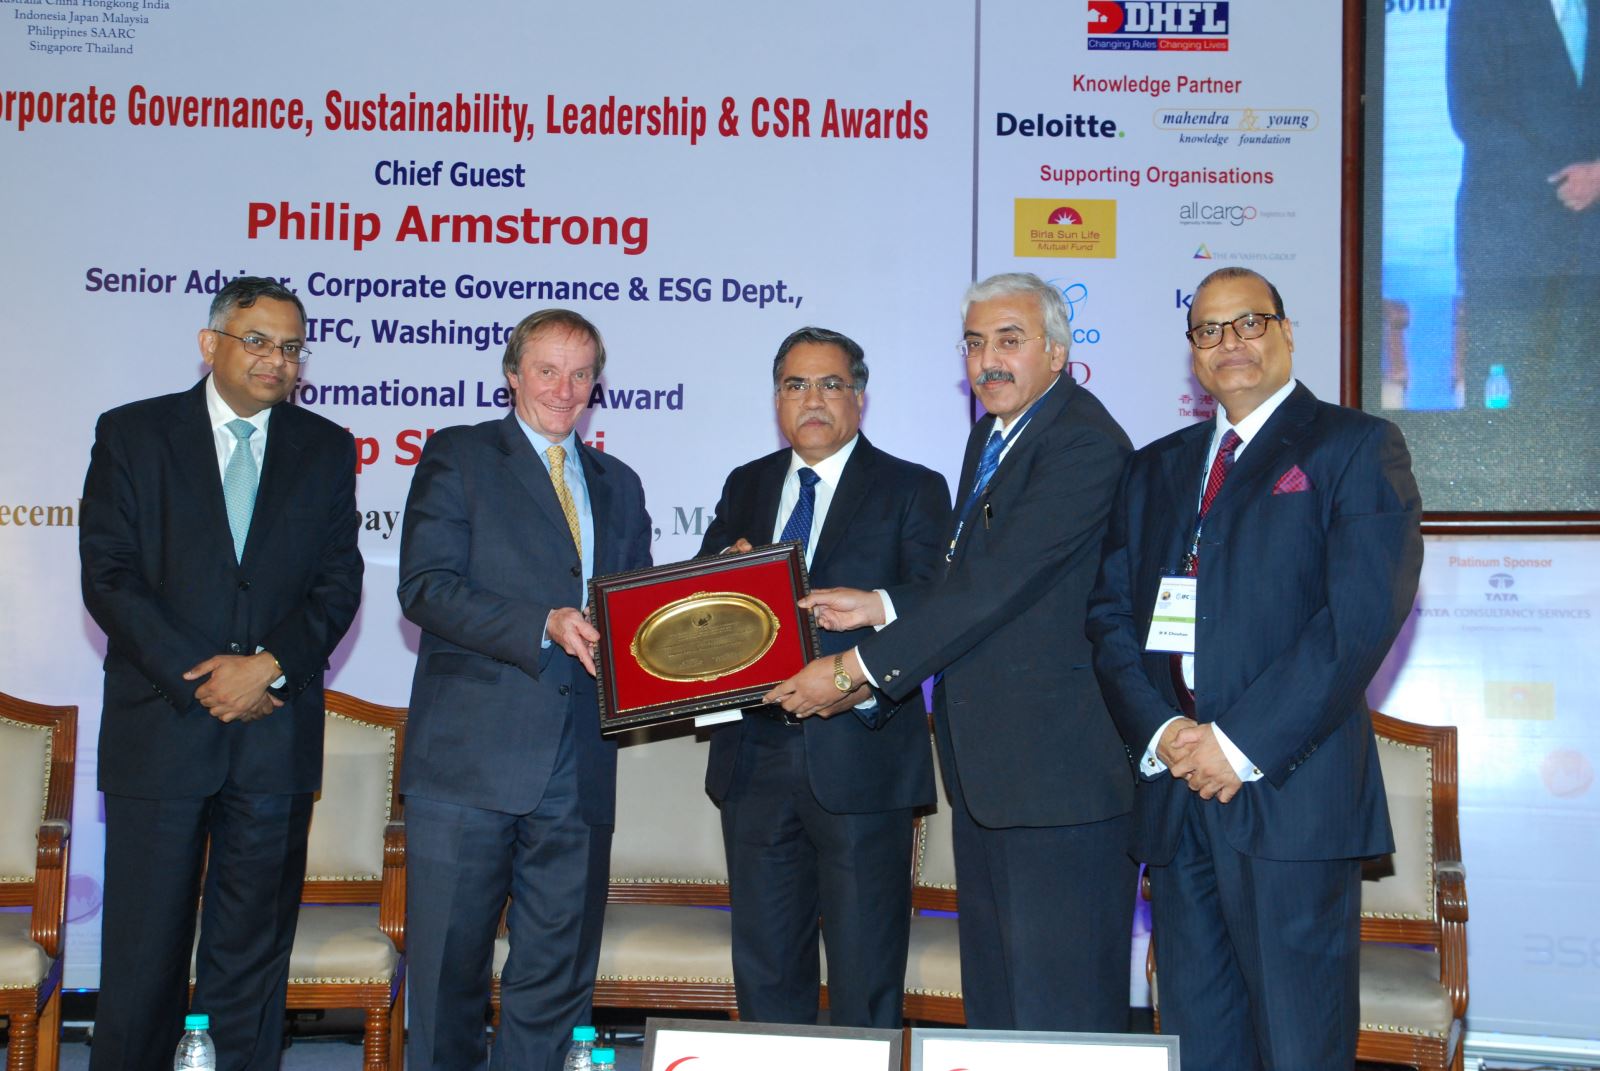 BPCL adjudged as “Company with Best CSR & Sustainability” 2014.